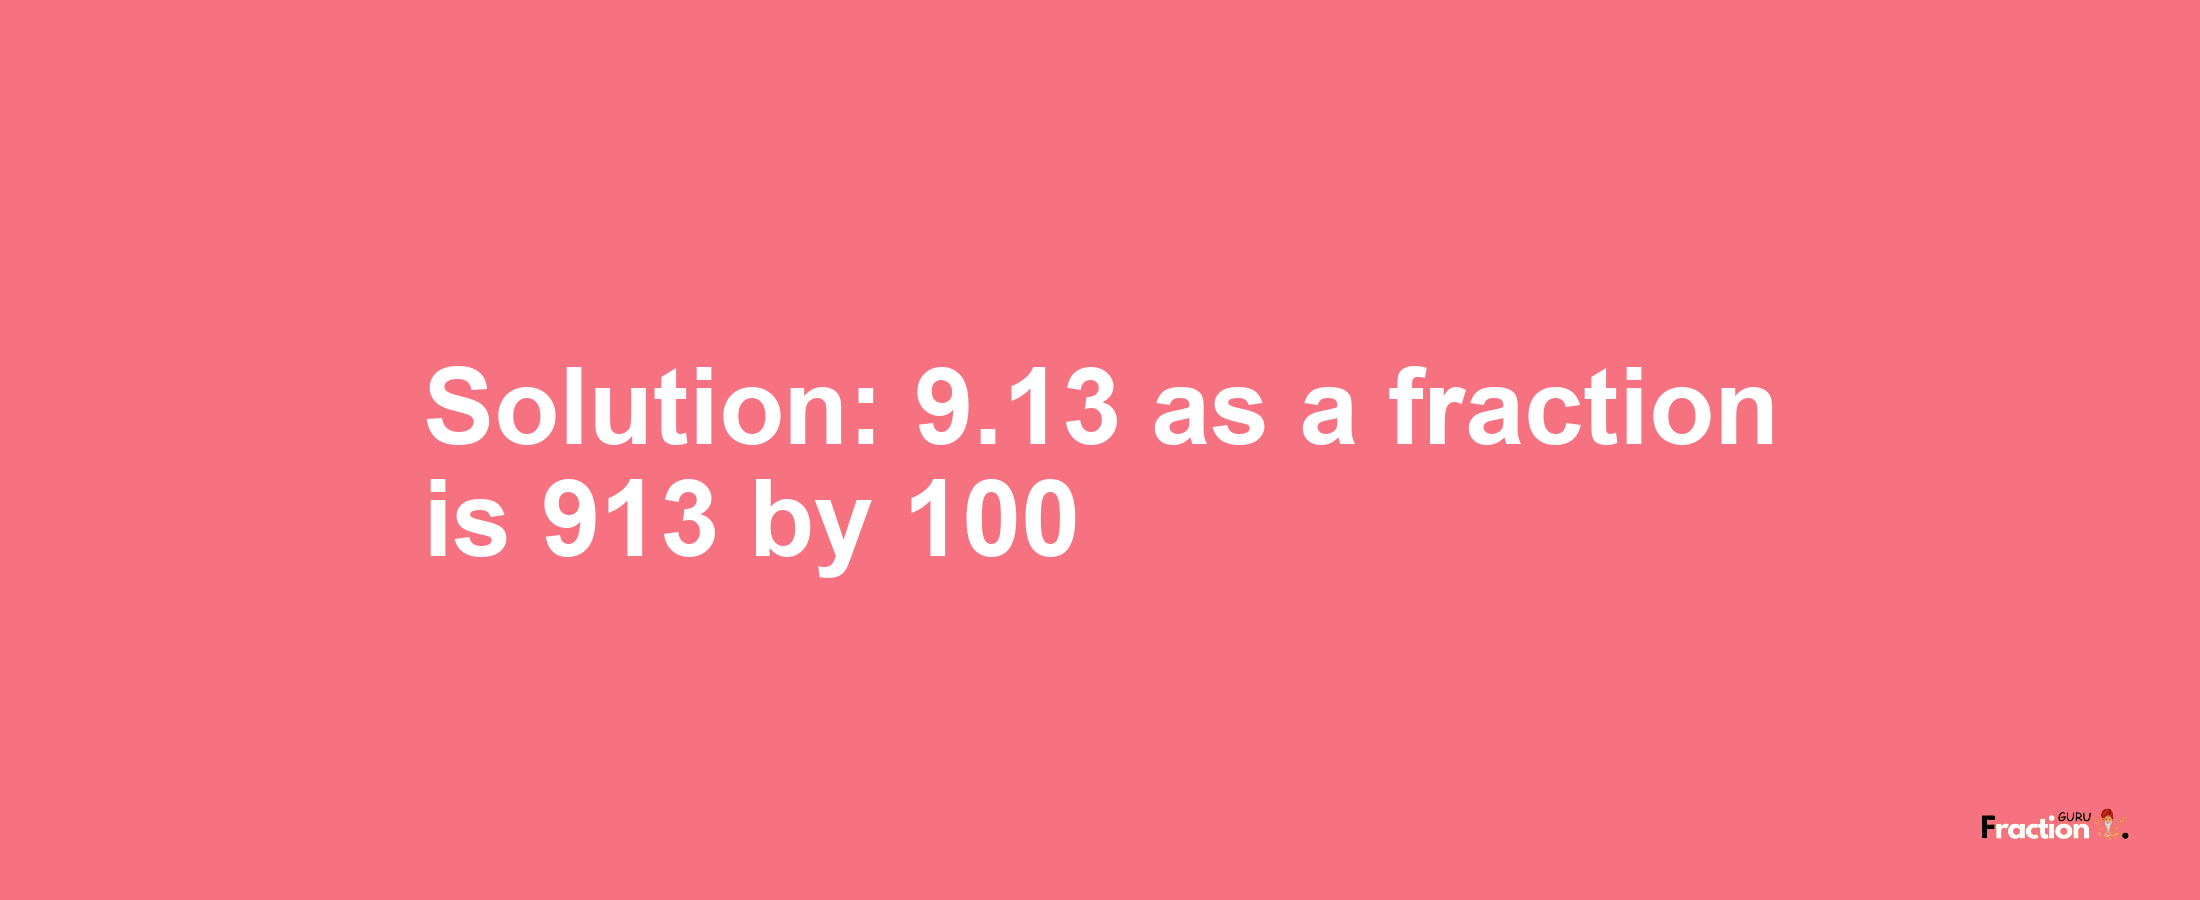 Solution:9.13 as a fraction is 913/100